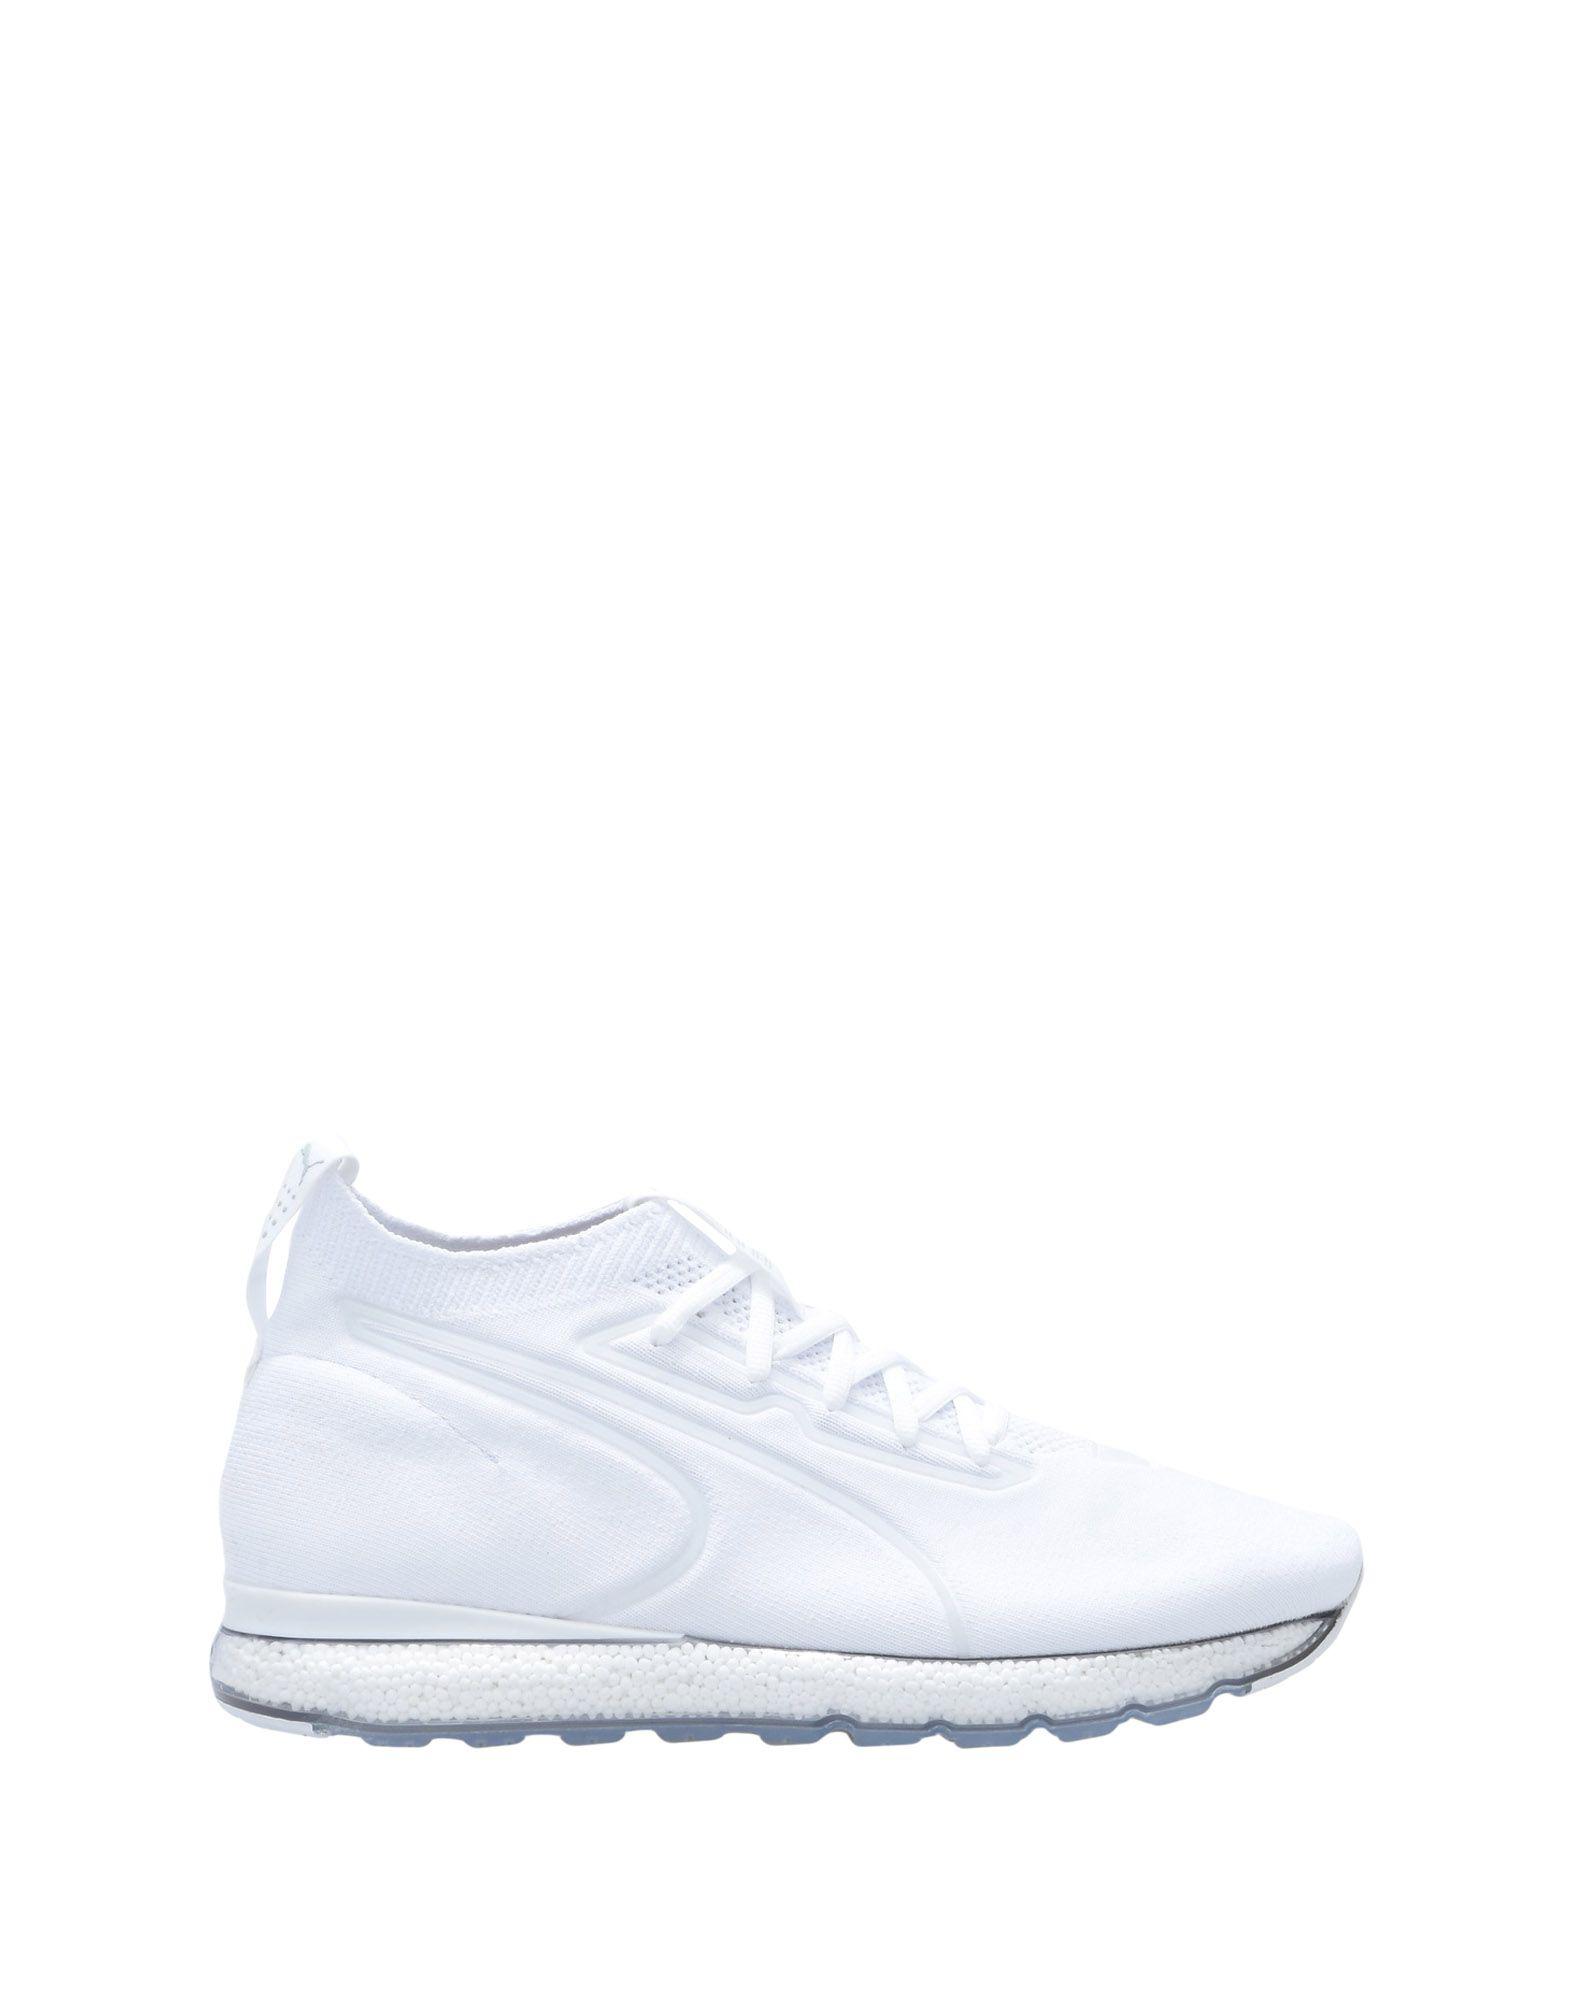 PUMA High-tops & Sneakers in White for Men - Lyst